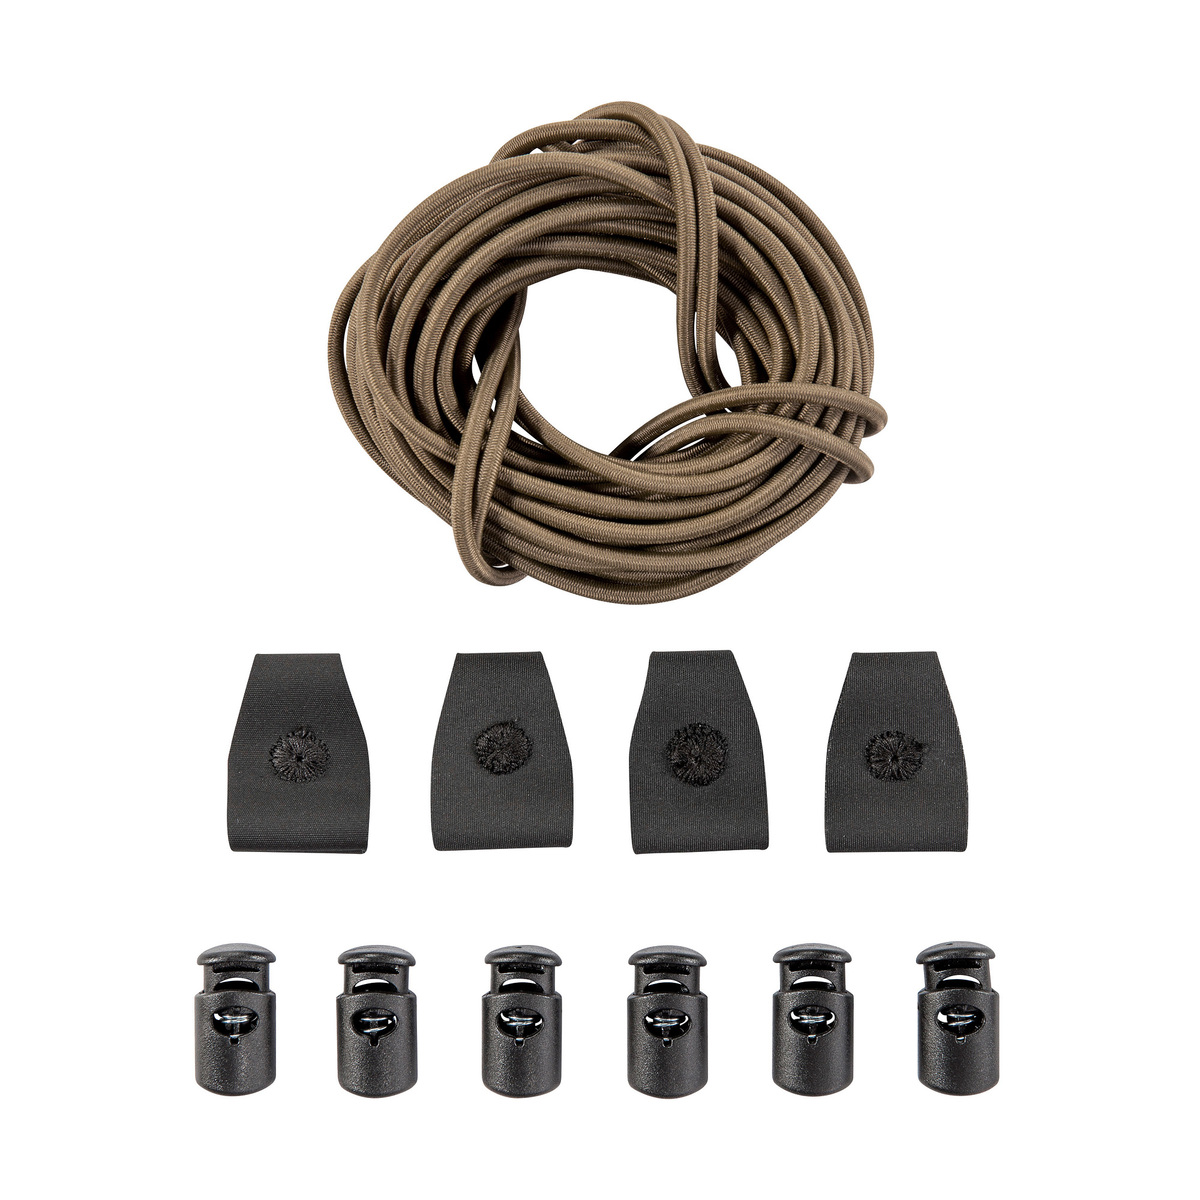 Bungee Cord Set Coyote brown, One Size